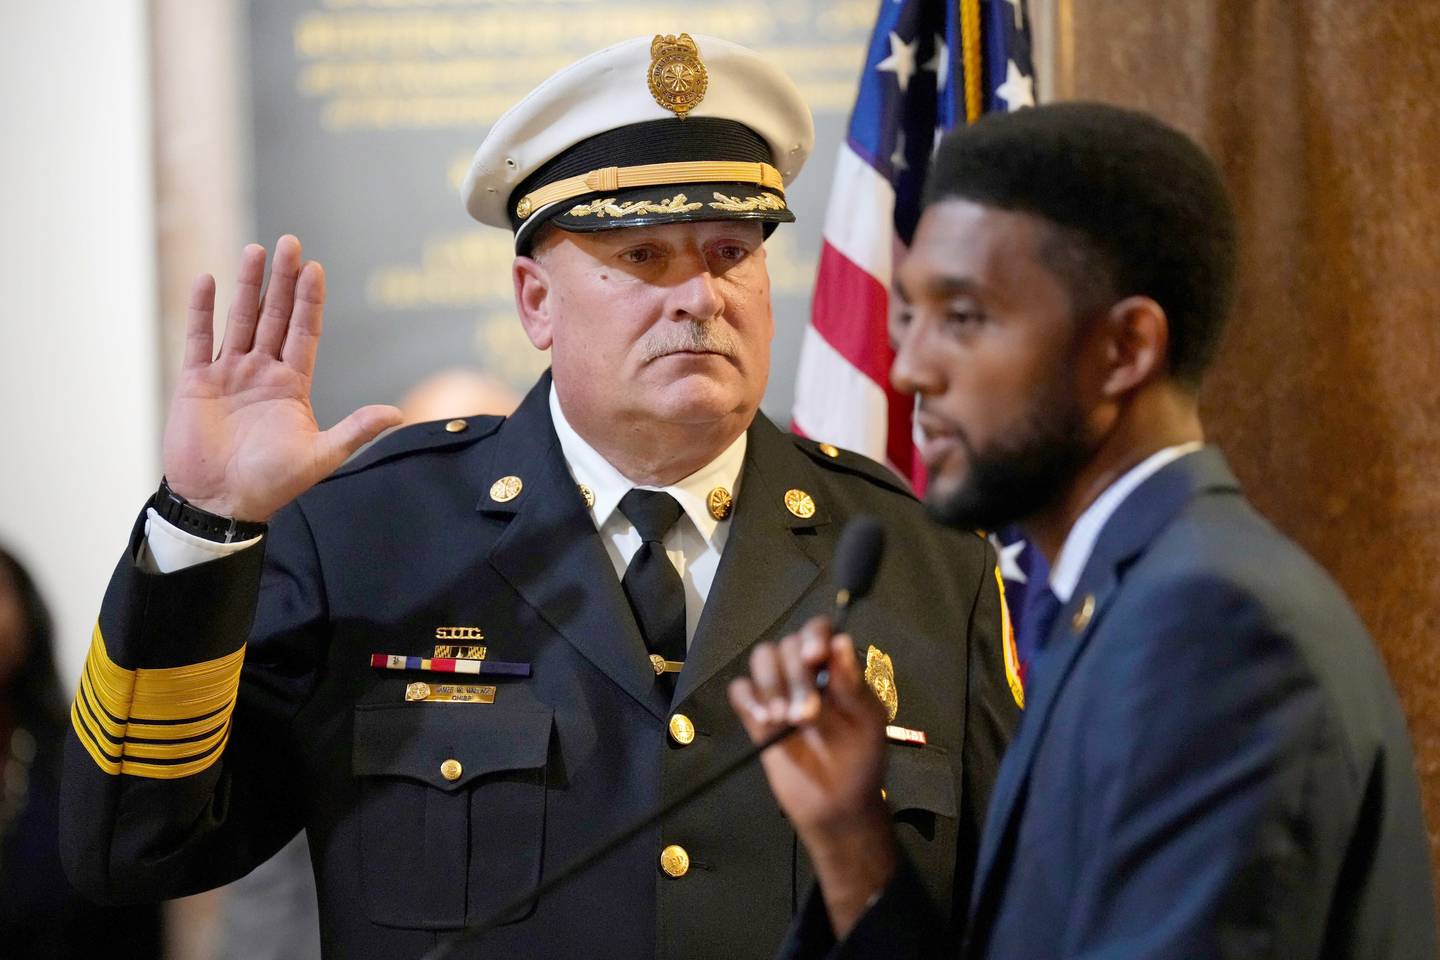 Baltimore Fire Chief James Wallace is officially sworn into office by Mayor Brandon Scott during a ceremony at City Hall on Thursday, October 5.